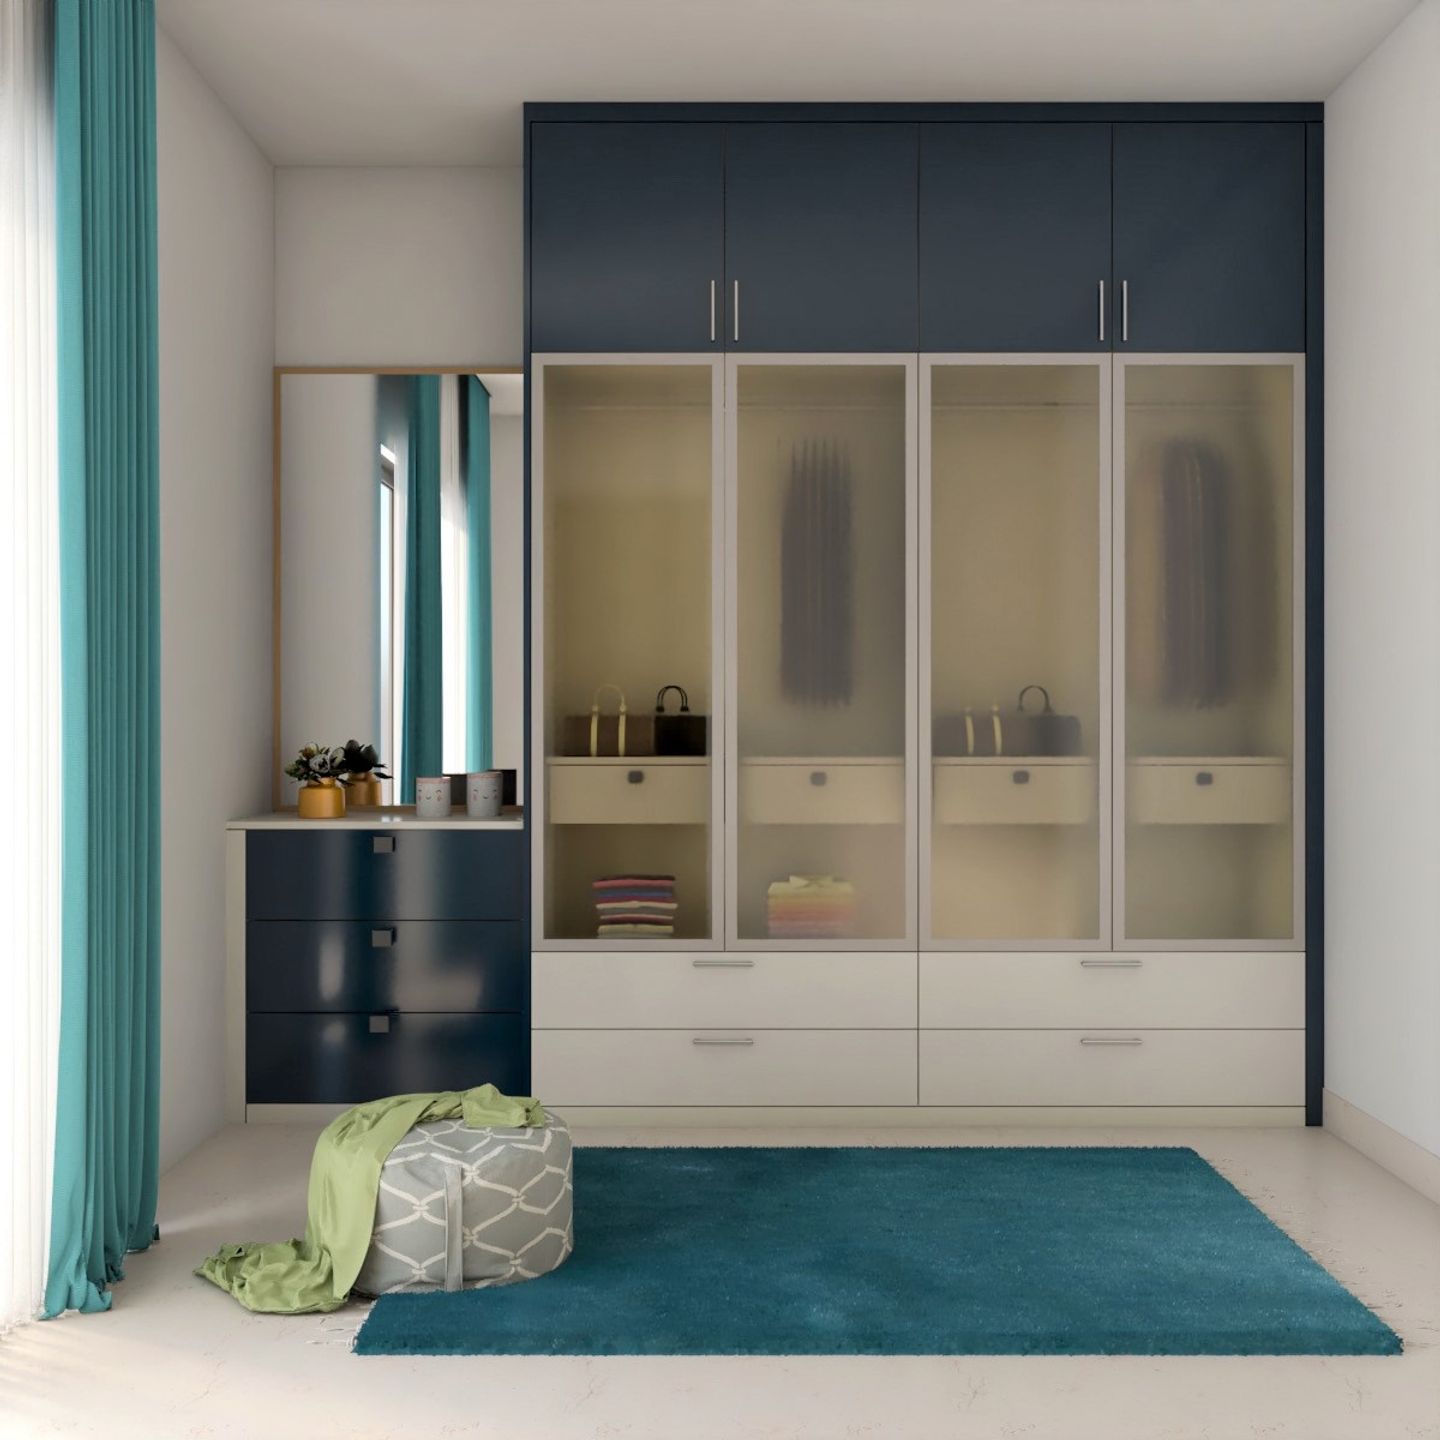 Modern Wardrobe Design with Frosted Glass Door - Livspace